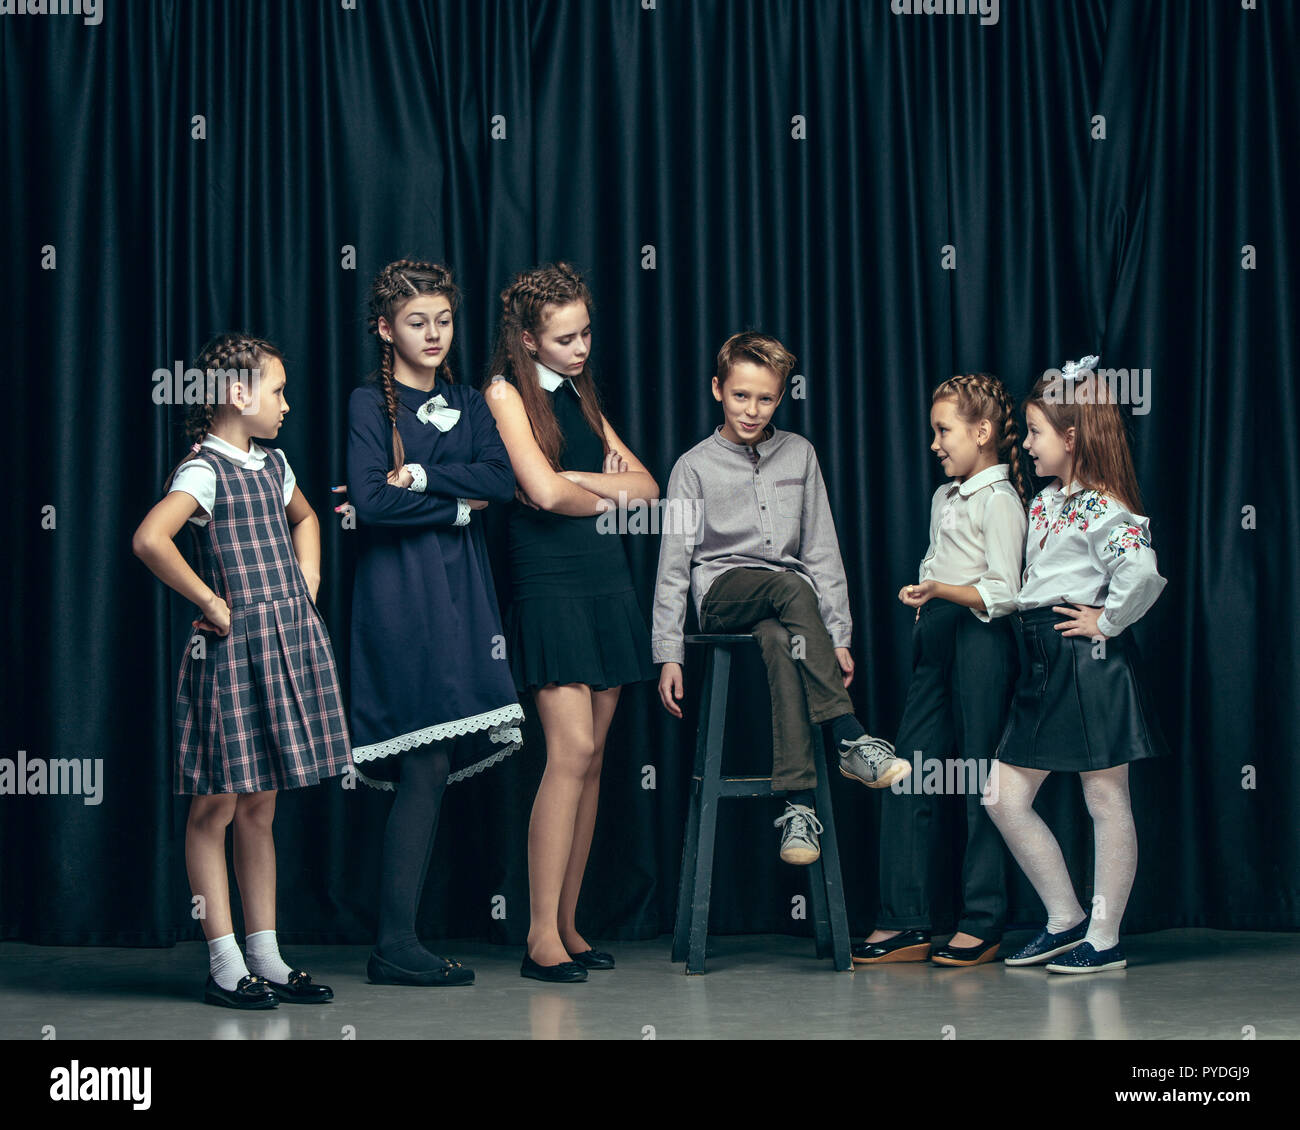 Cute surprised stylish children on dark background. Beautiful stylish teen  girls and boy standing together and posing on the school stage in front of  the curtain. Classic style. Kids fashion and emotions